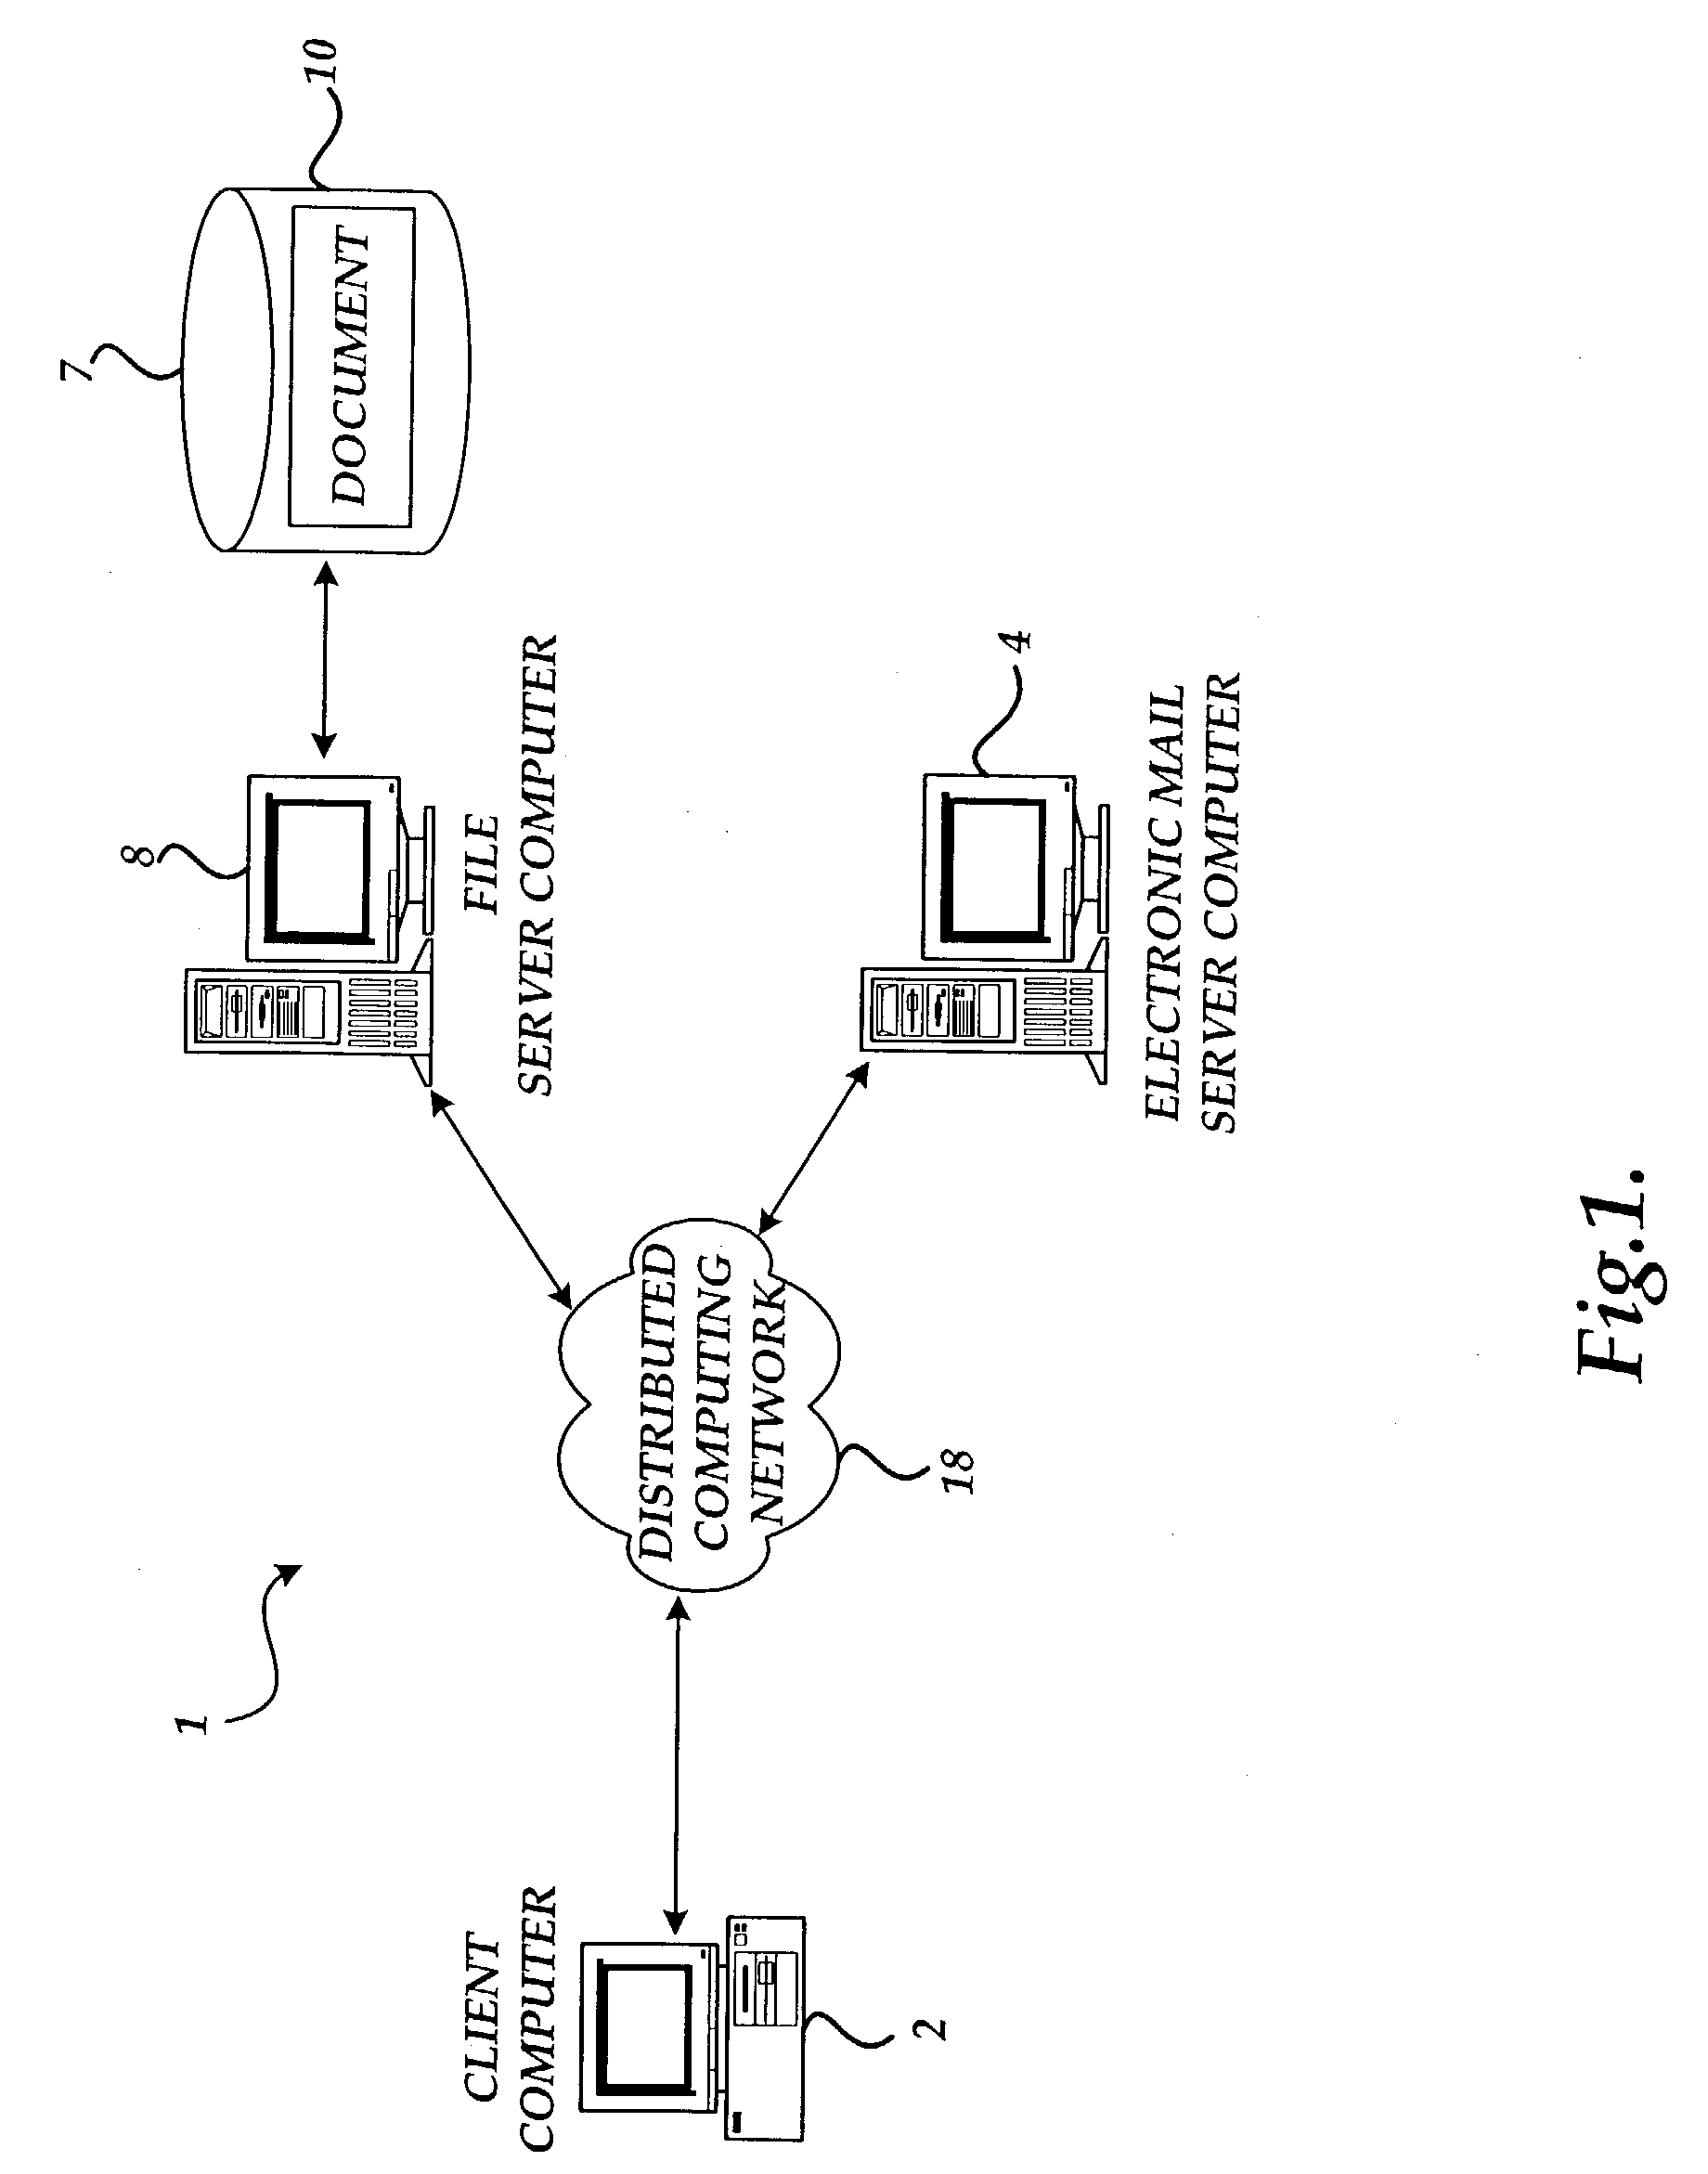 System for displaying a notification window from completely transparent to intermediate level of opacity as a function of time to indicate an event has occurred